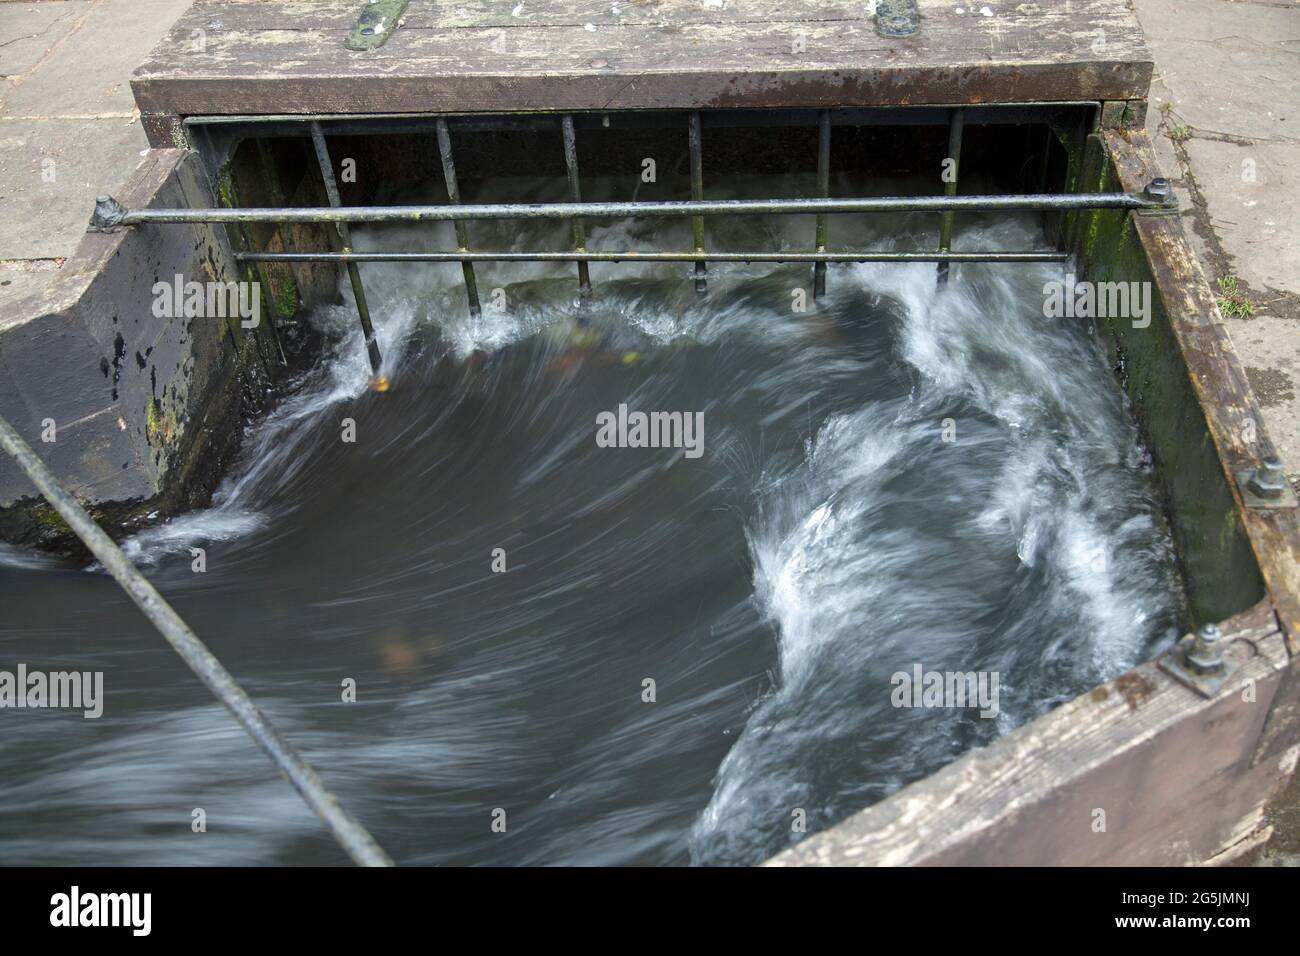 Water rushing down a wooden watercourse towards an exit, possibly a drain or culvert, taken with a slow exposure to show the movement of water Stock Photo